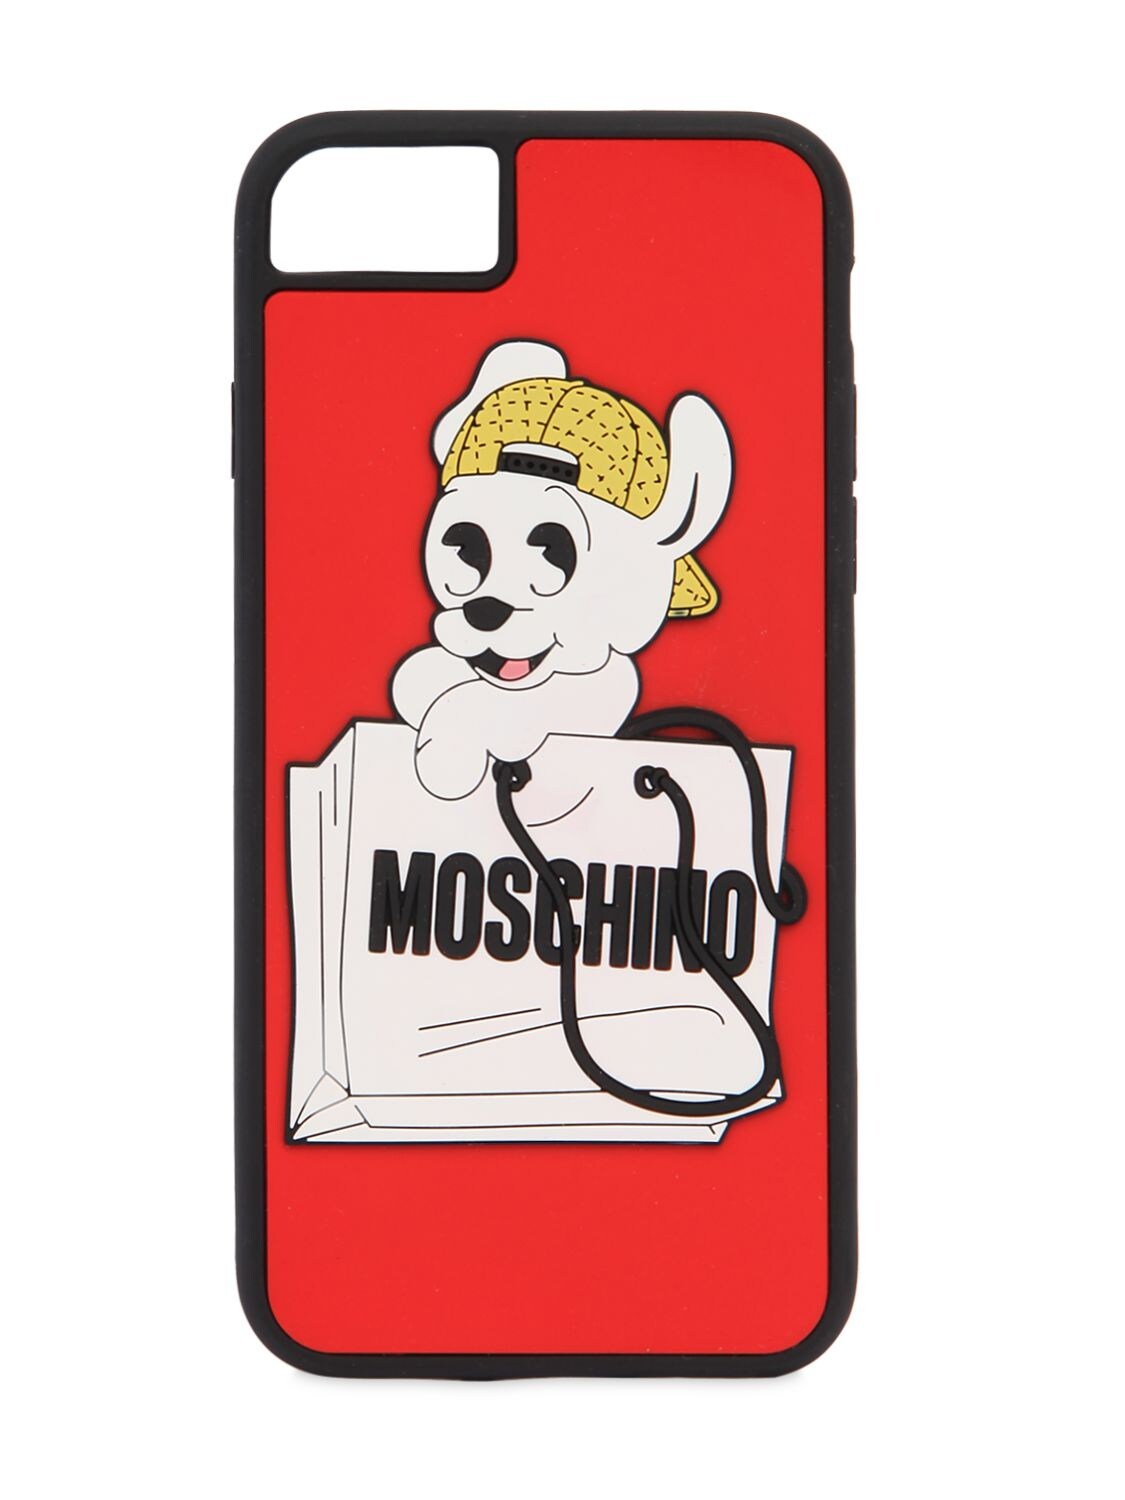 MOSCHINO PUDGY PRINTED IPHONE 7 COVER,67I5L5006-MTExNQ2